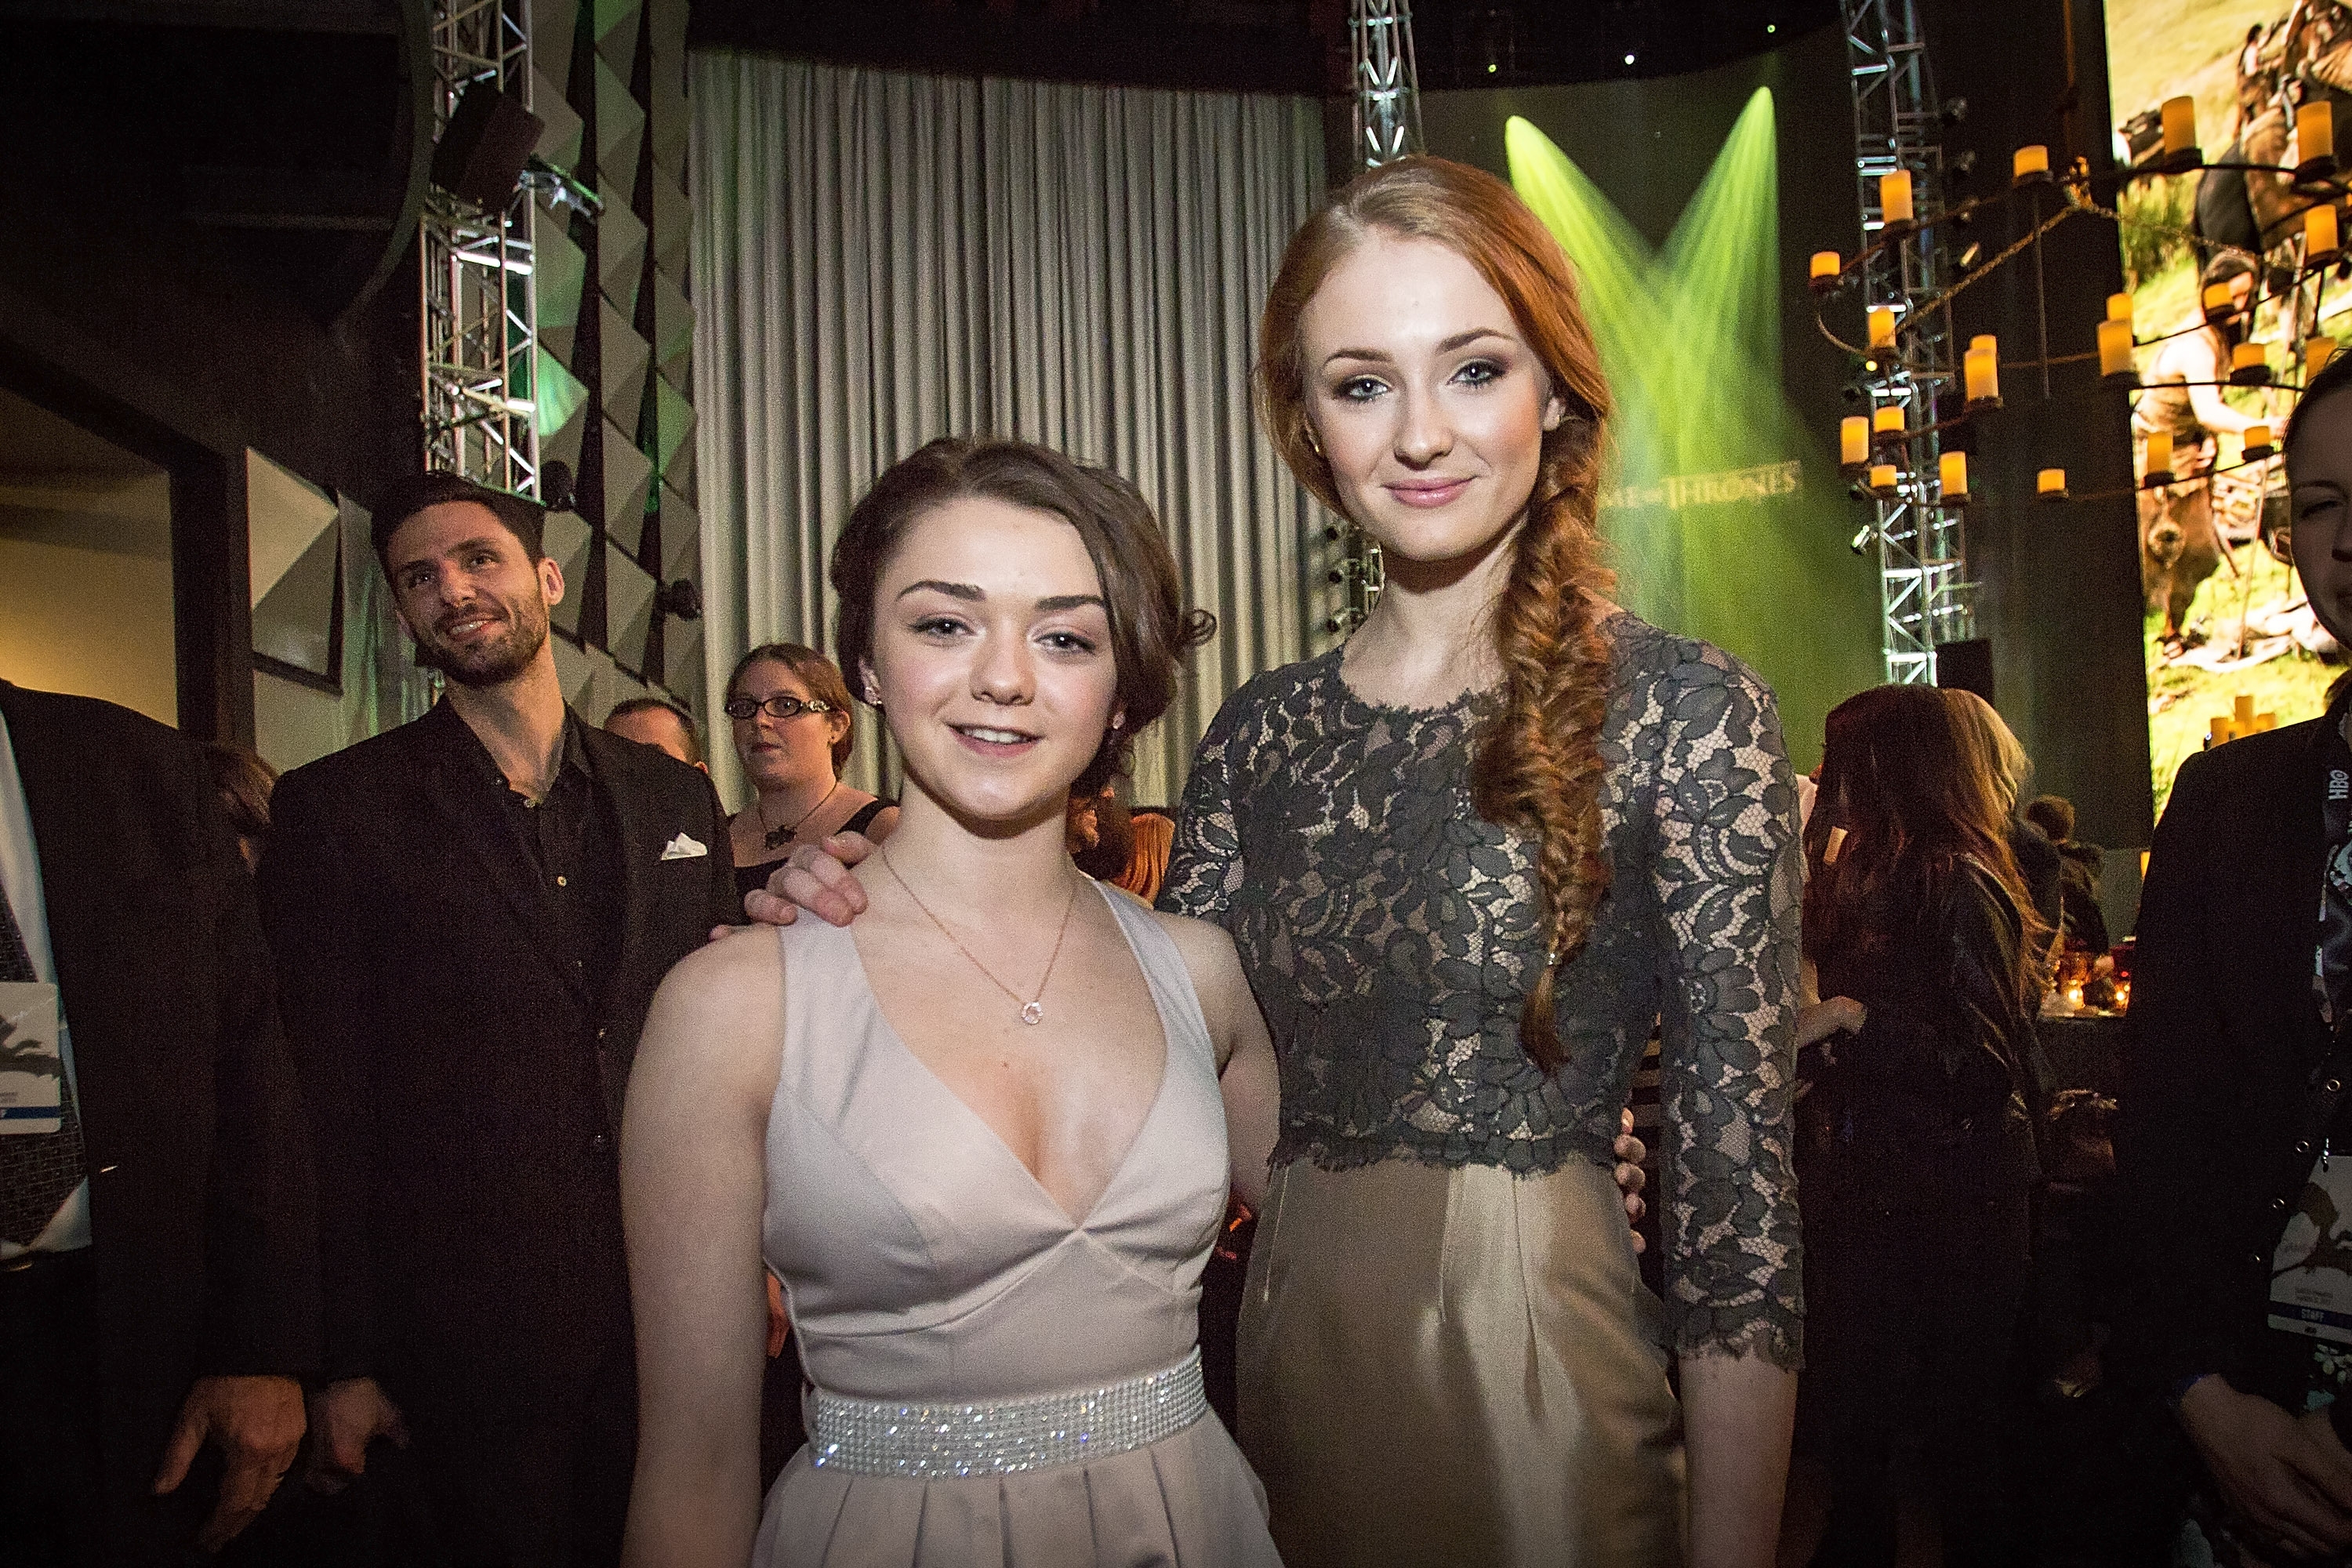 https://maisiewilliams.org/gallery/albums/Public Apperances/2013/March 21st-Game of Thrones Season 3 Seattle Premiere/0014.jpg